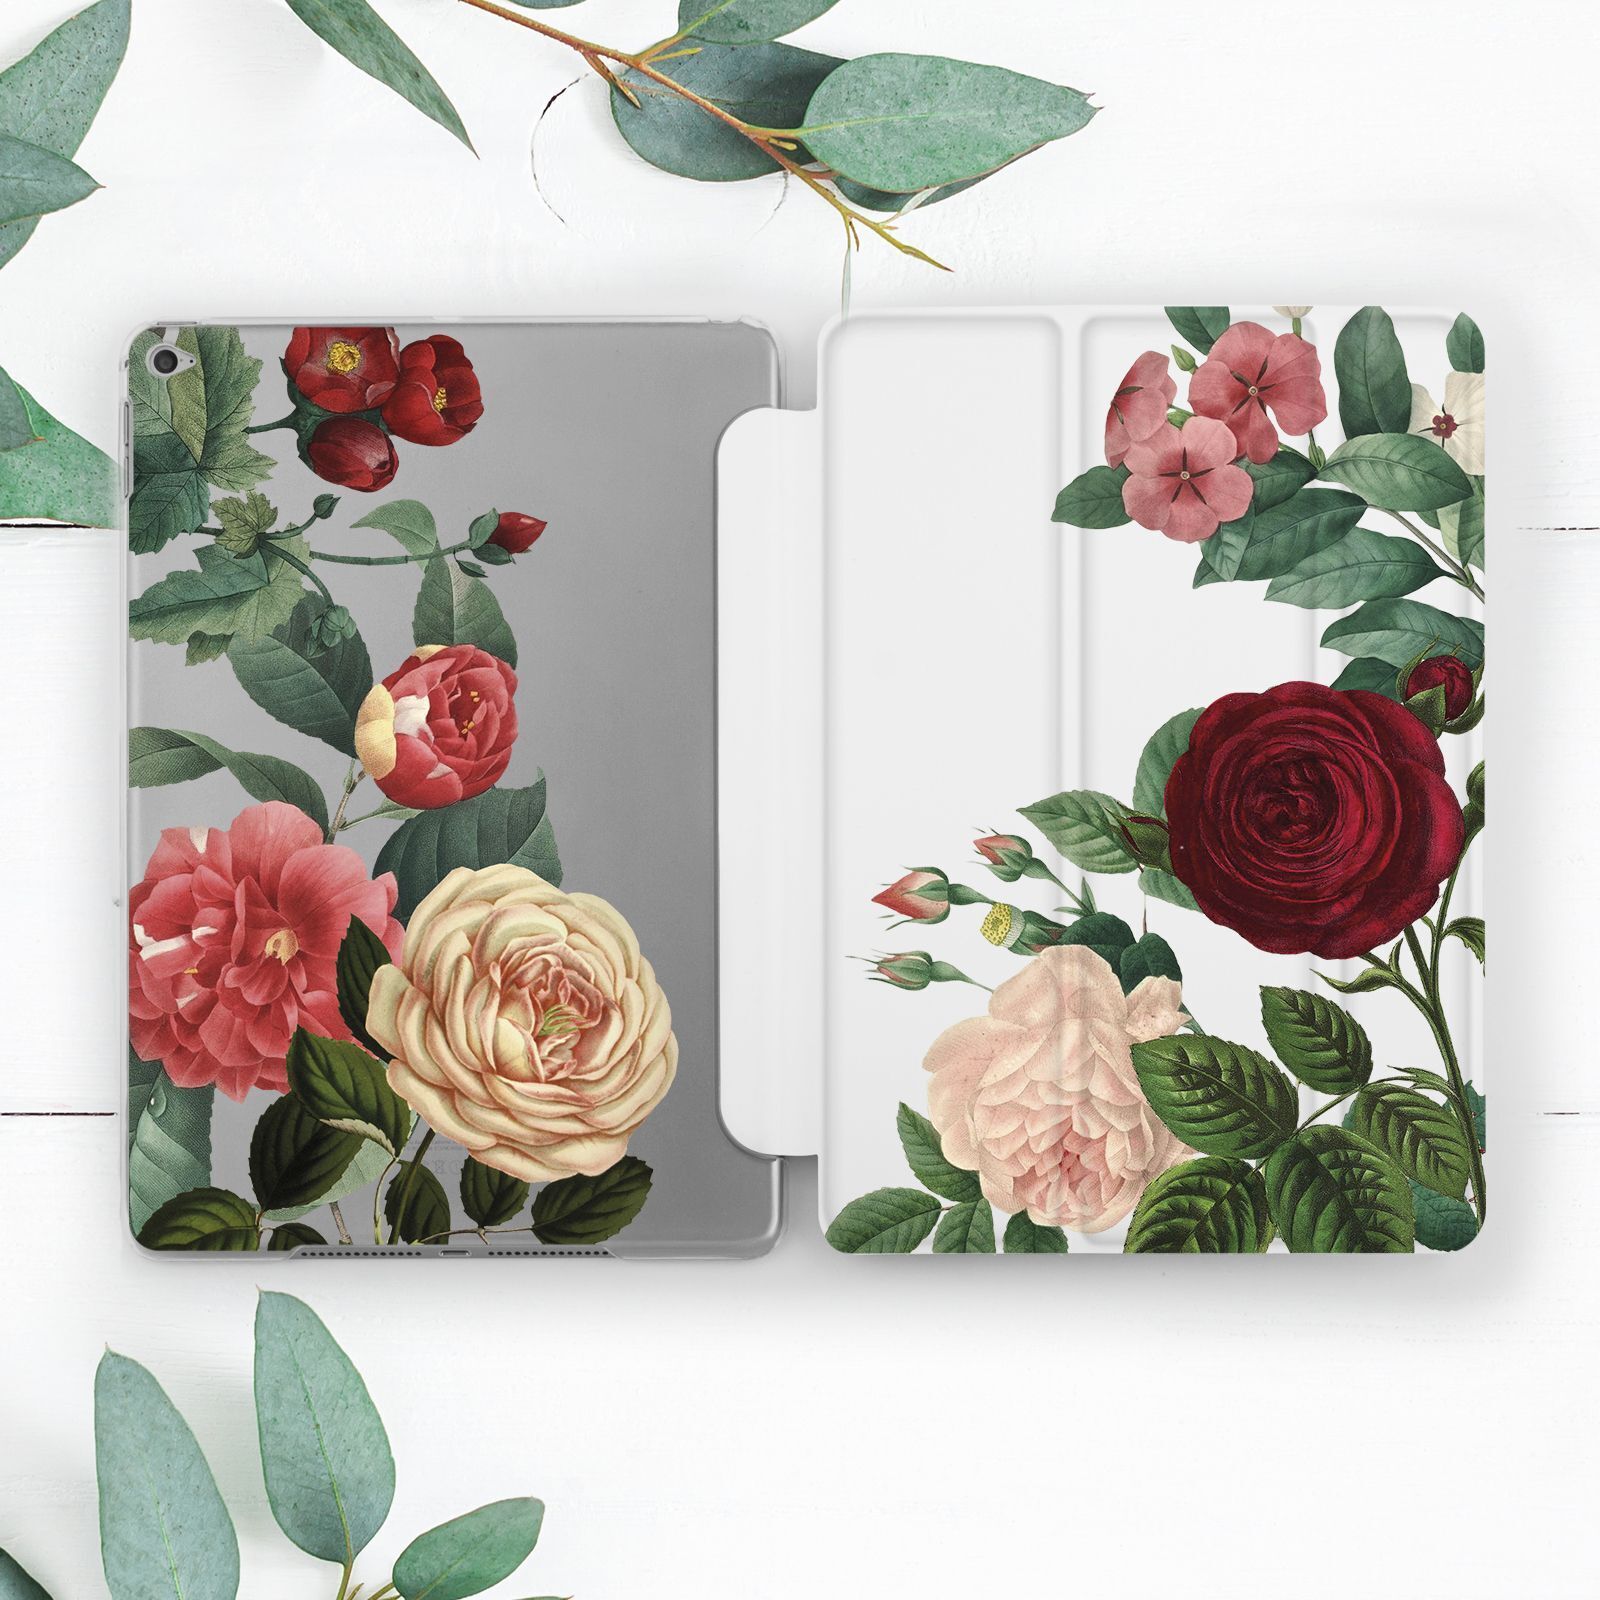 Vintage Rose Flower Floral Girly Case For iPad 10.2 Pro 12.9 11 9.7 Air 4 5 Mini